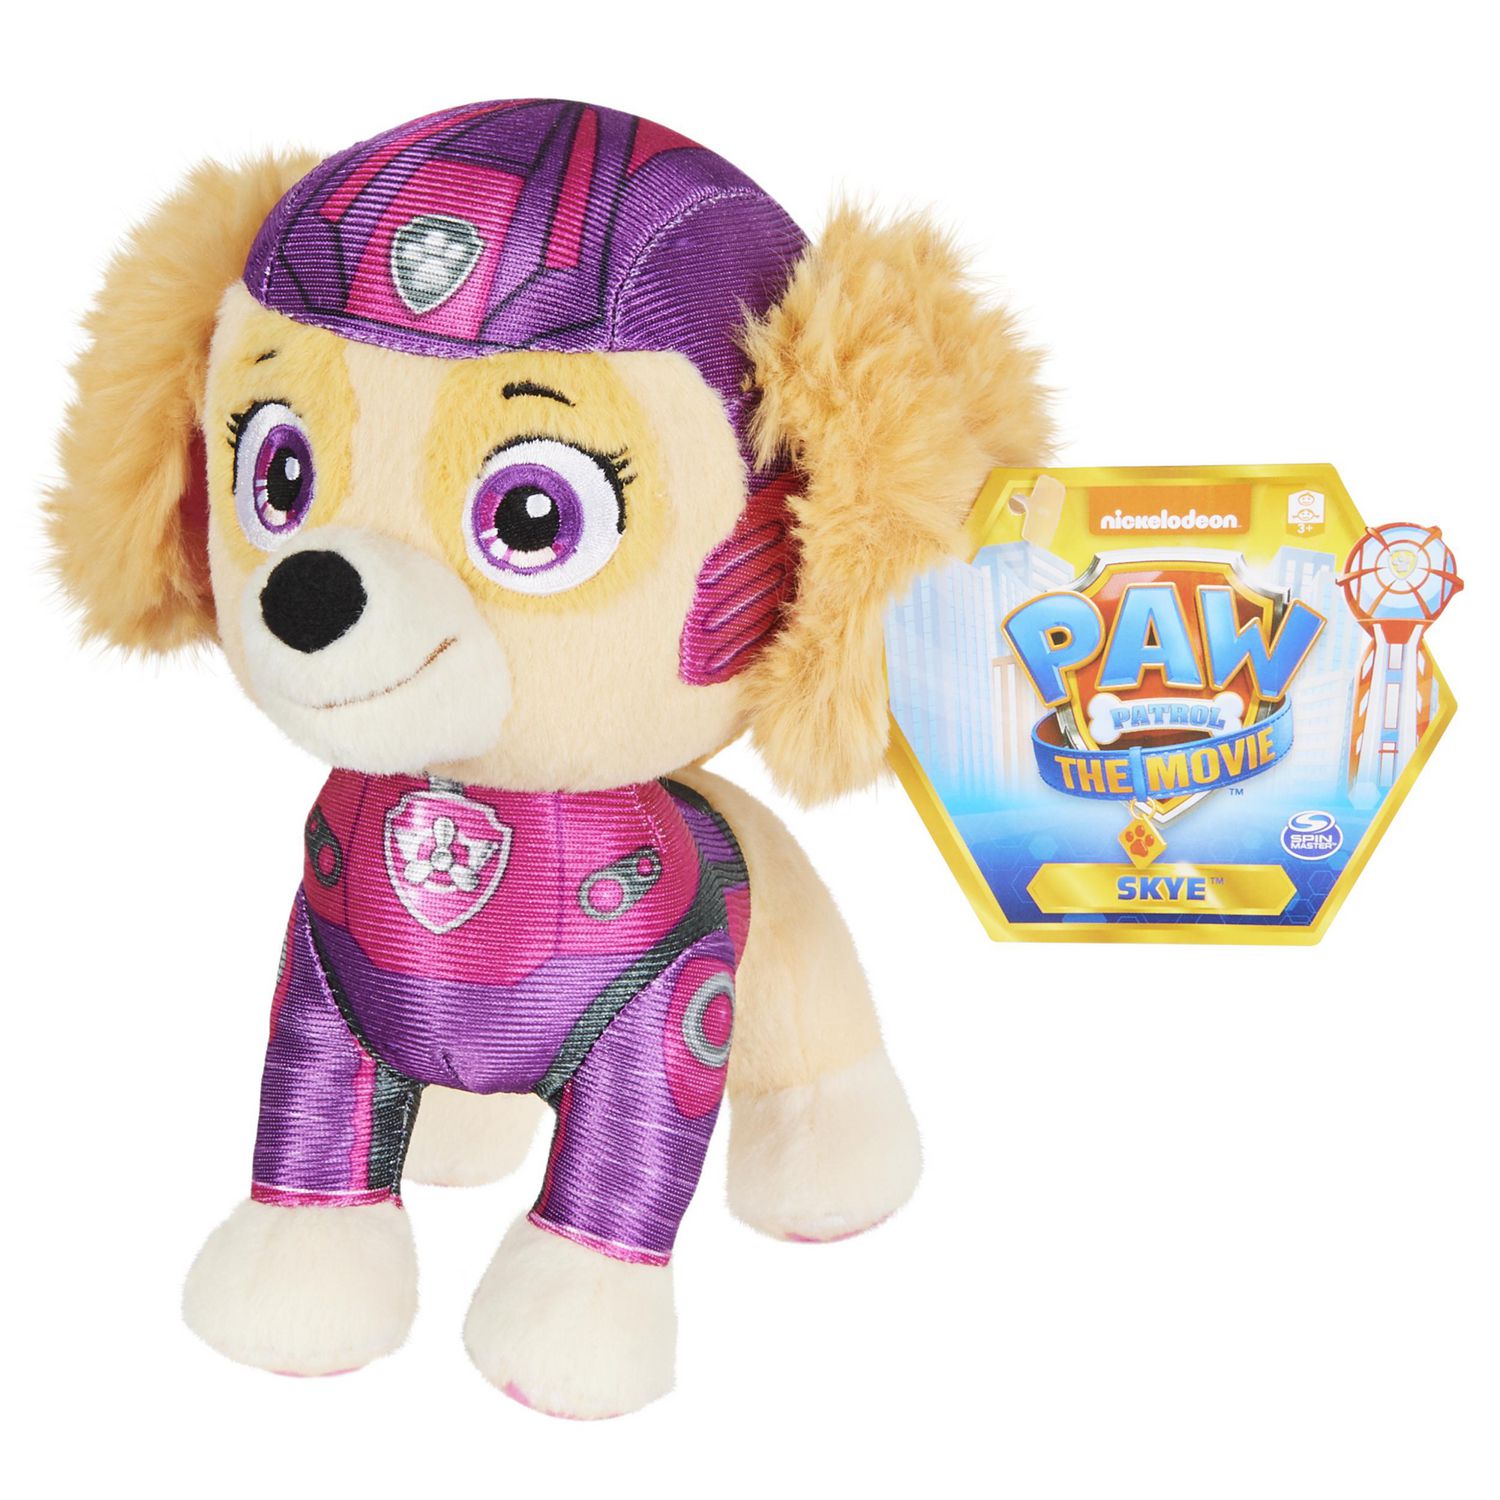 PAW Patrol, Movie Skye Stuffed Animal Plush Toy, 8-inch, Kids Toys for Ages  3 and up | Walmart Canada